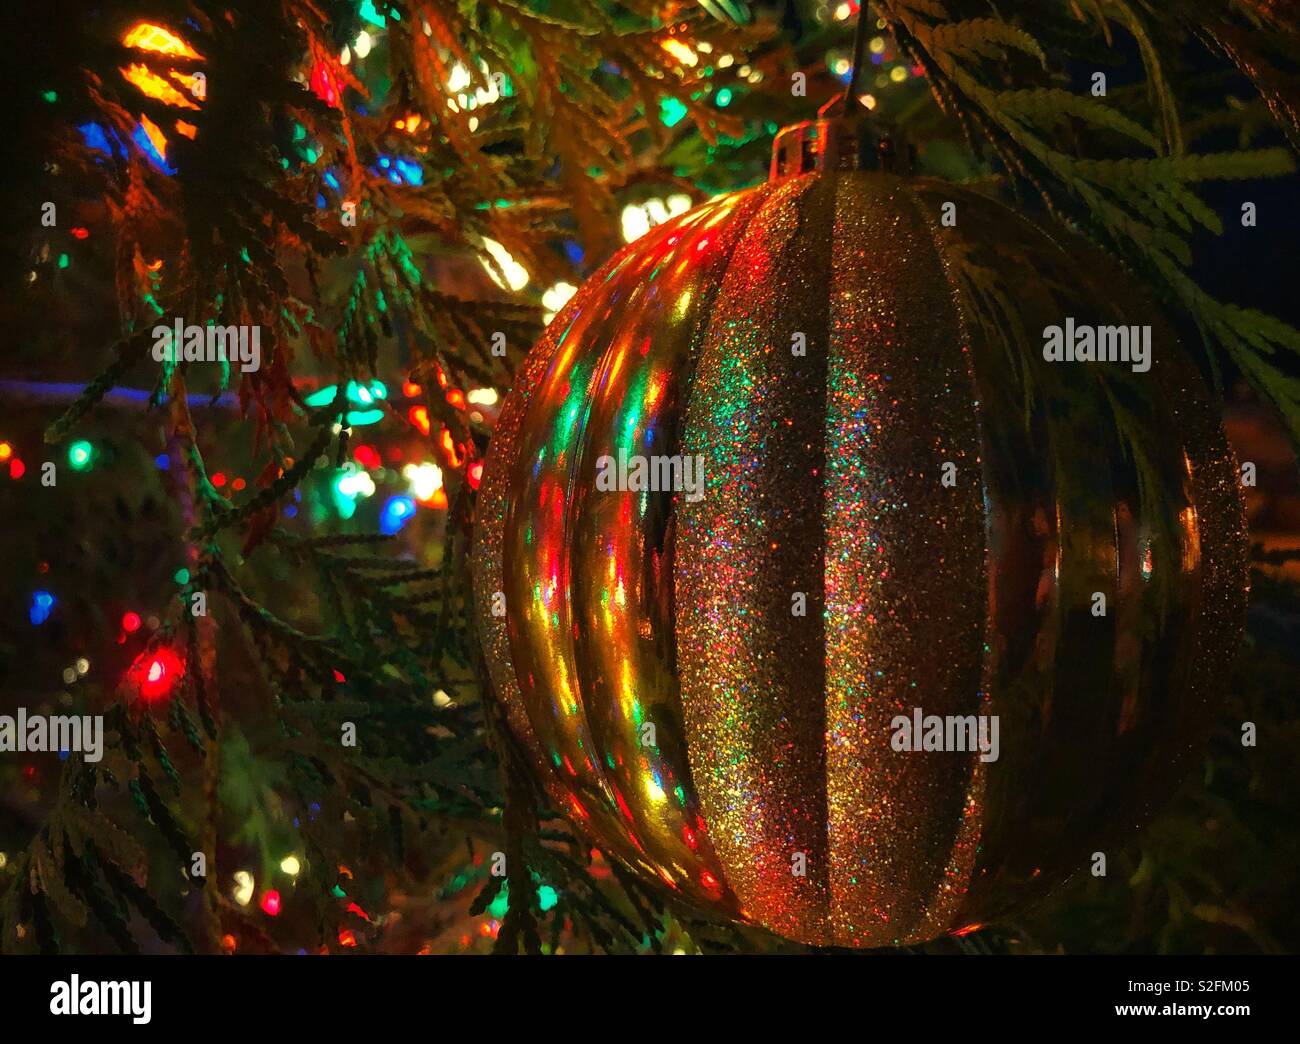 Christmas lights are reflected in a gold Christmas ball, Dec. 23, 2018, in Bayou La Batre, Alabama. Stock Photo